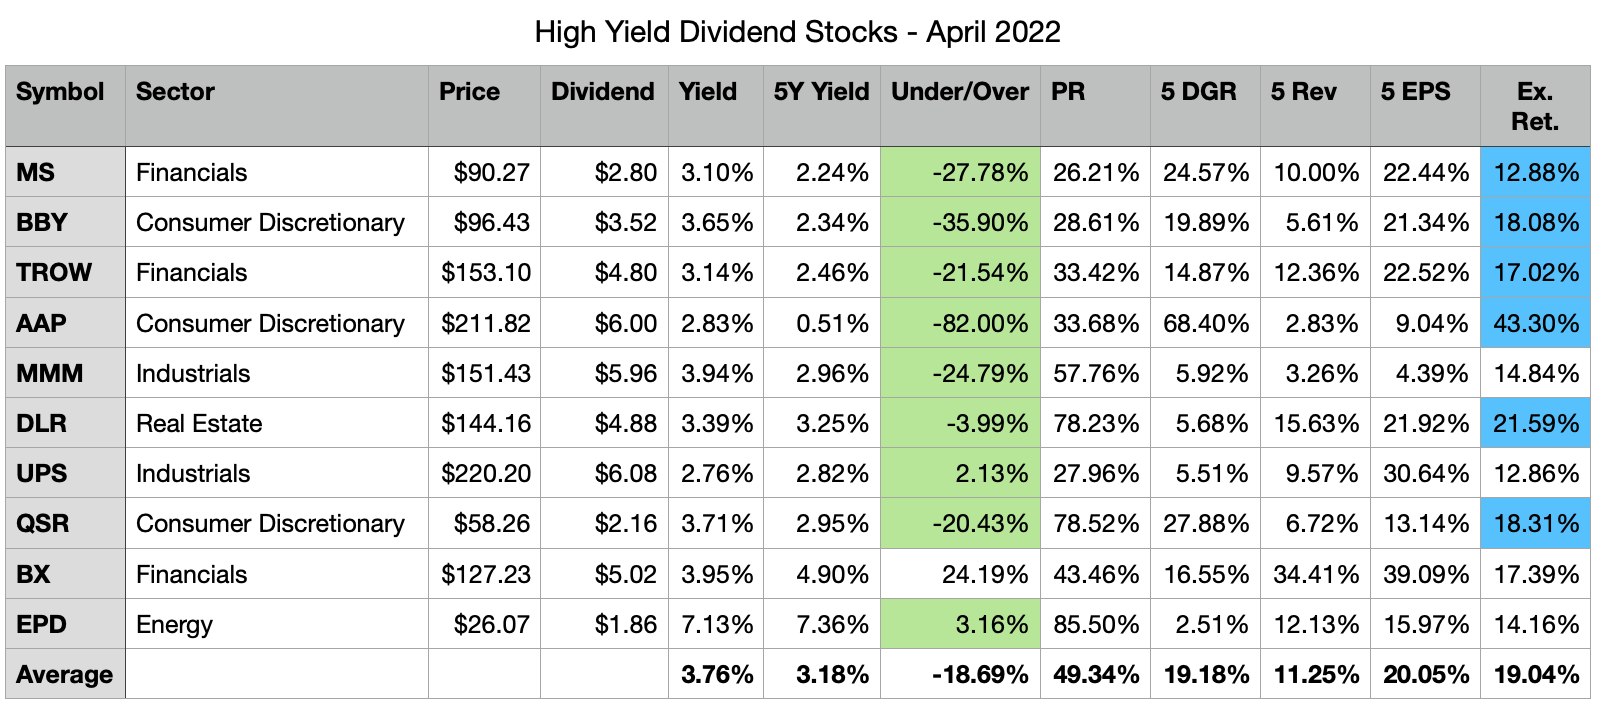 high yield dividend stocks in April 2022